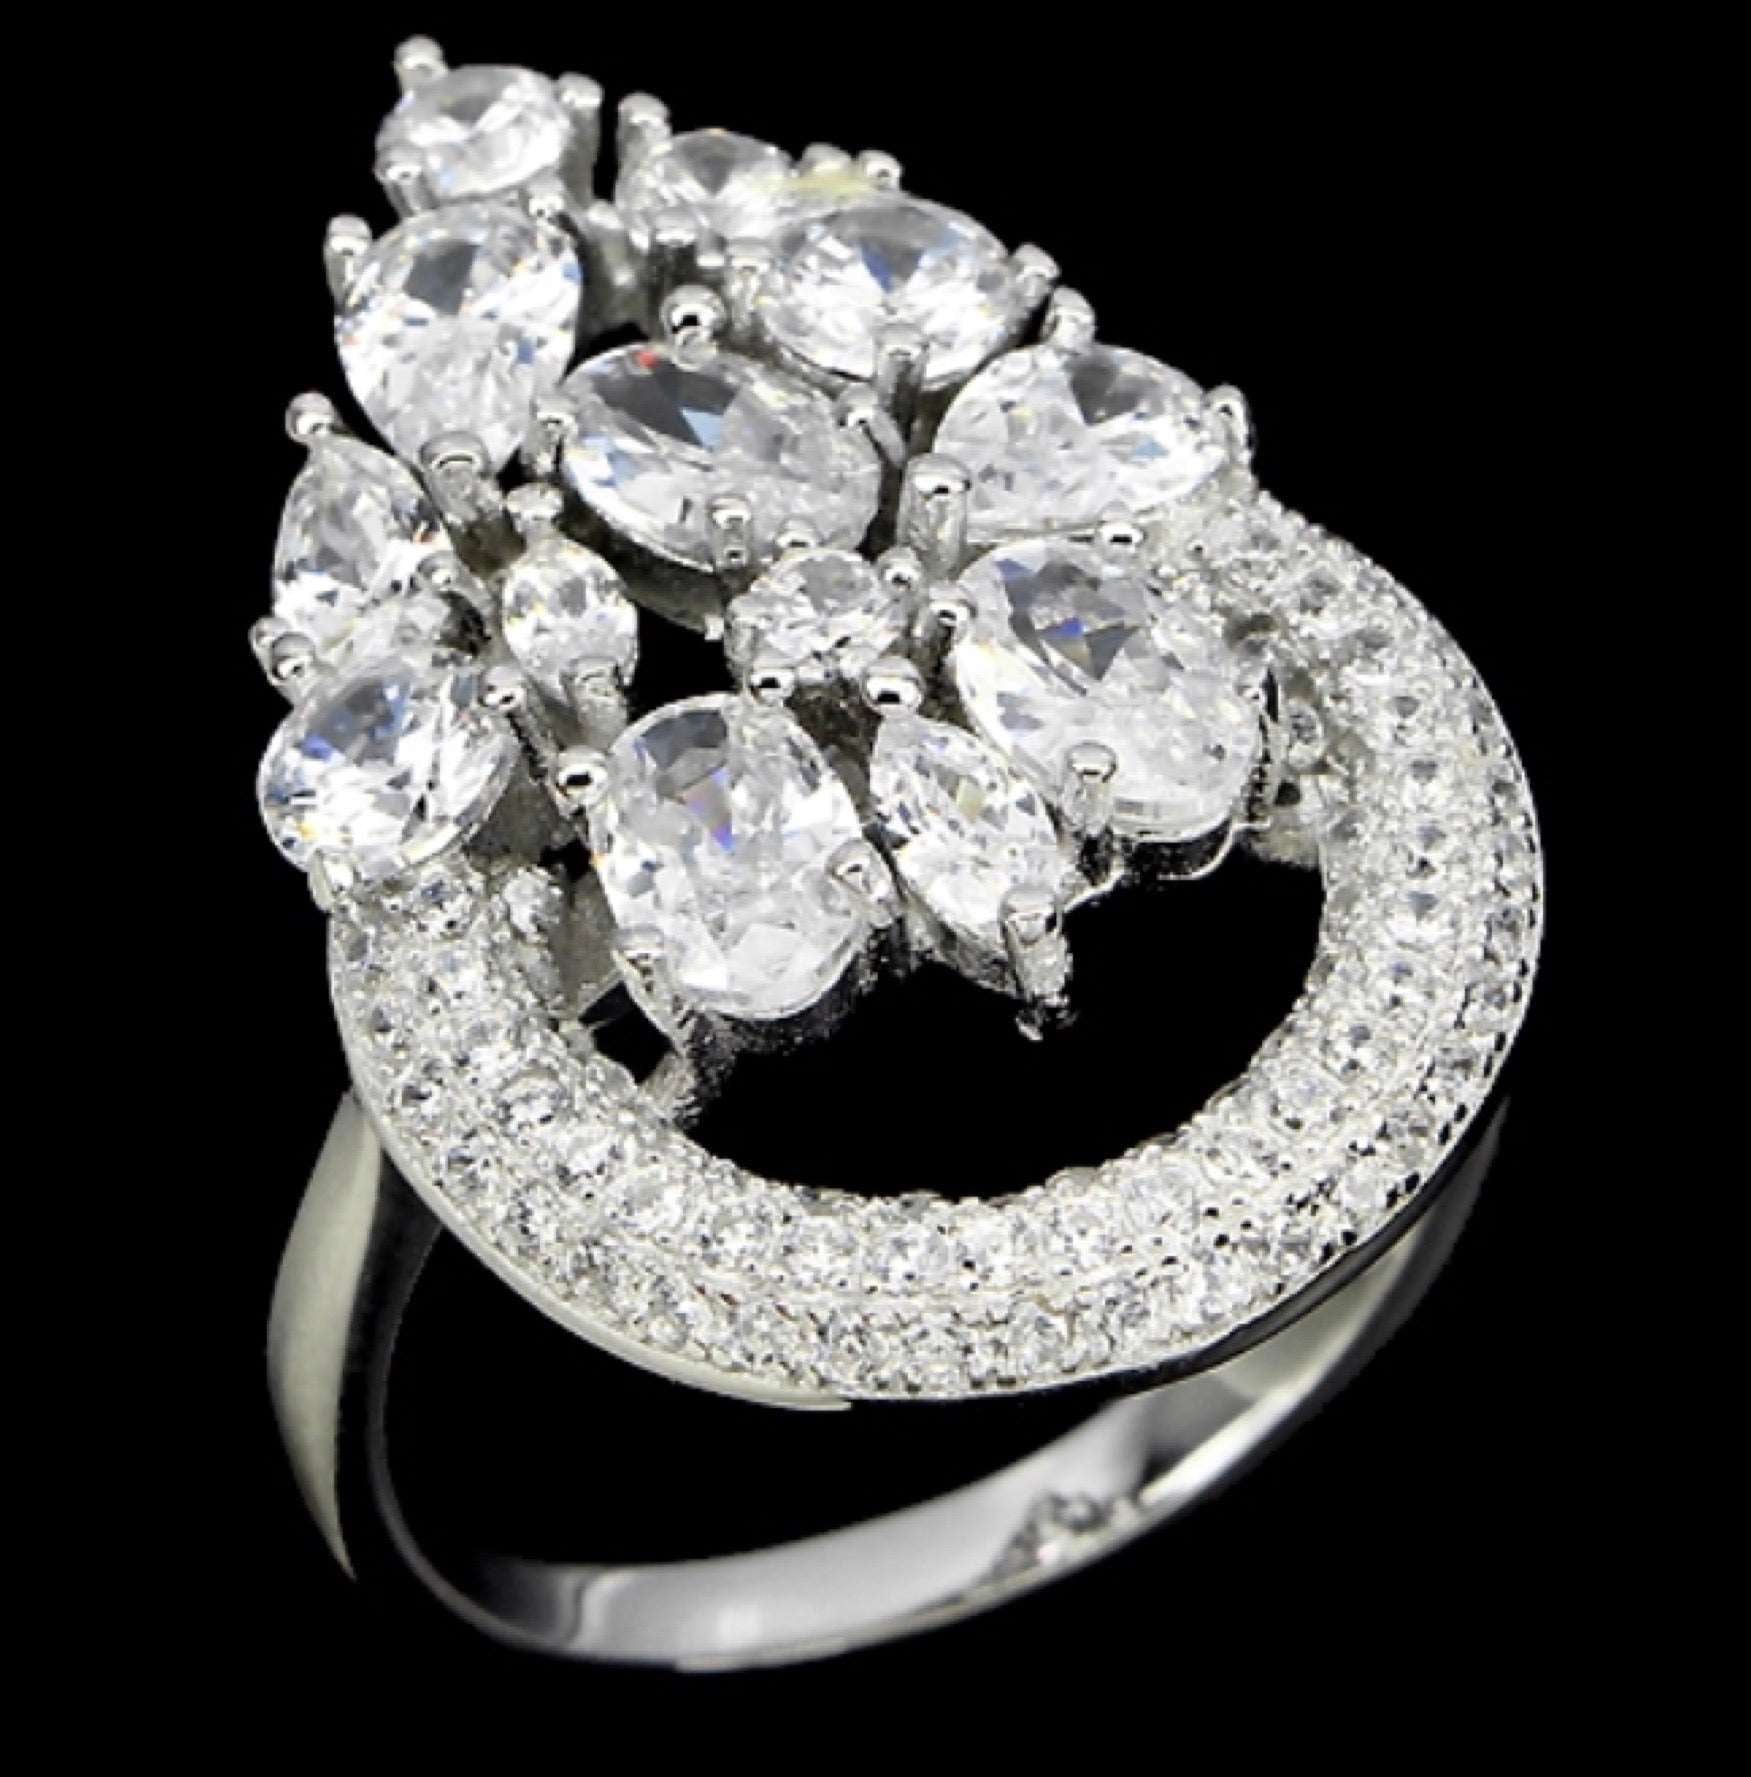 30.60 Cts Natural White Cubic Zirconia Solid .925 Silver Ring Size 9 - BELLADONNA